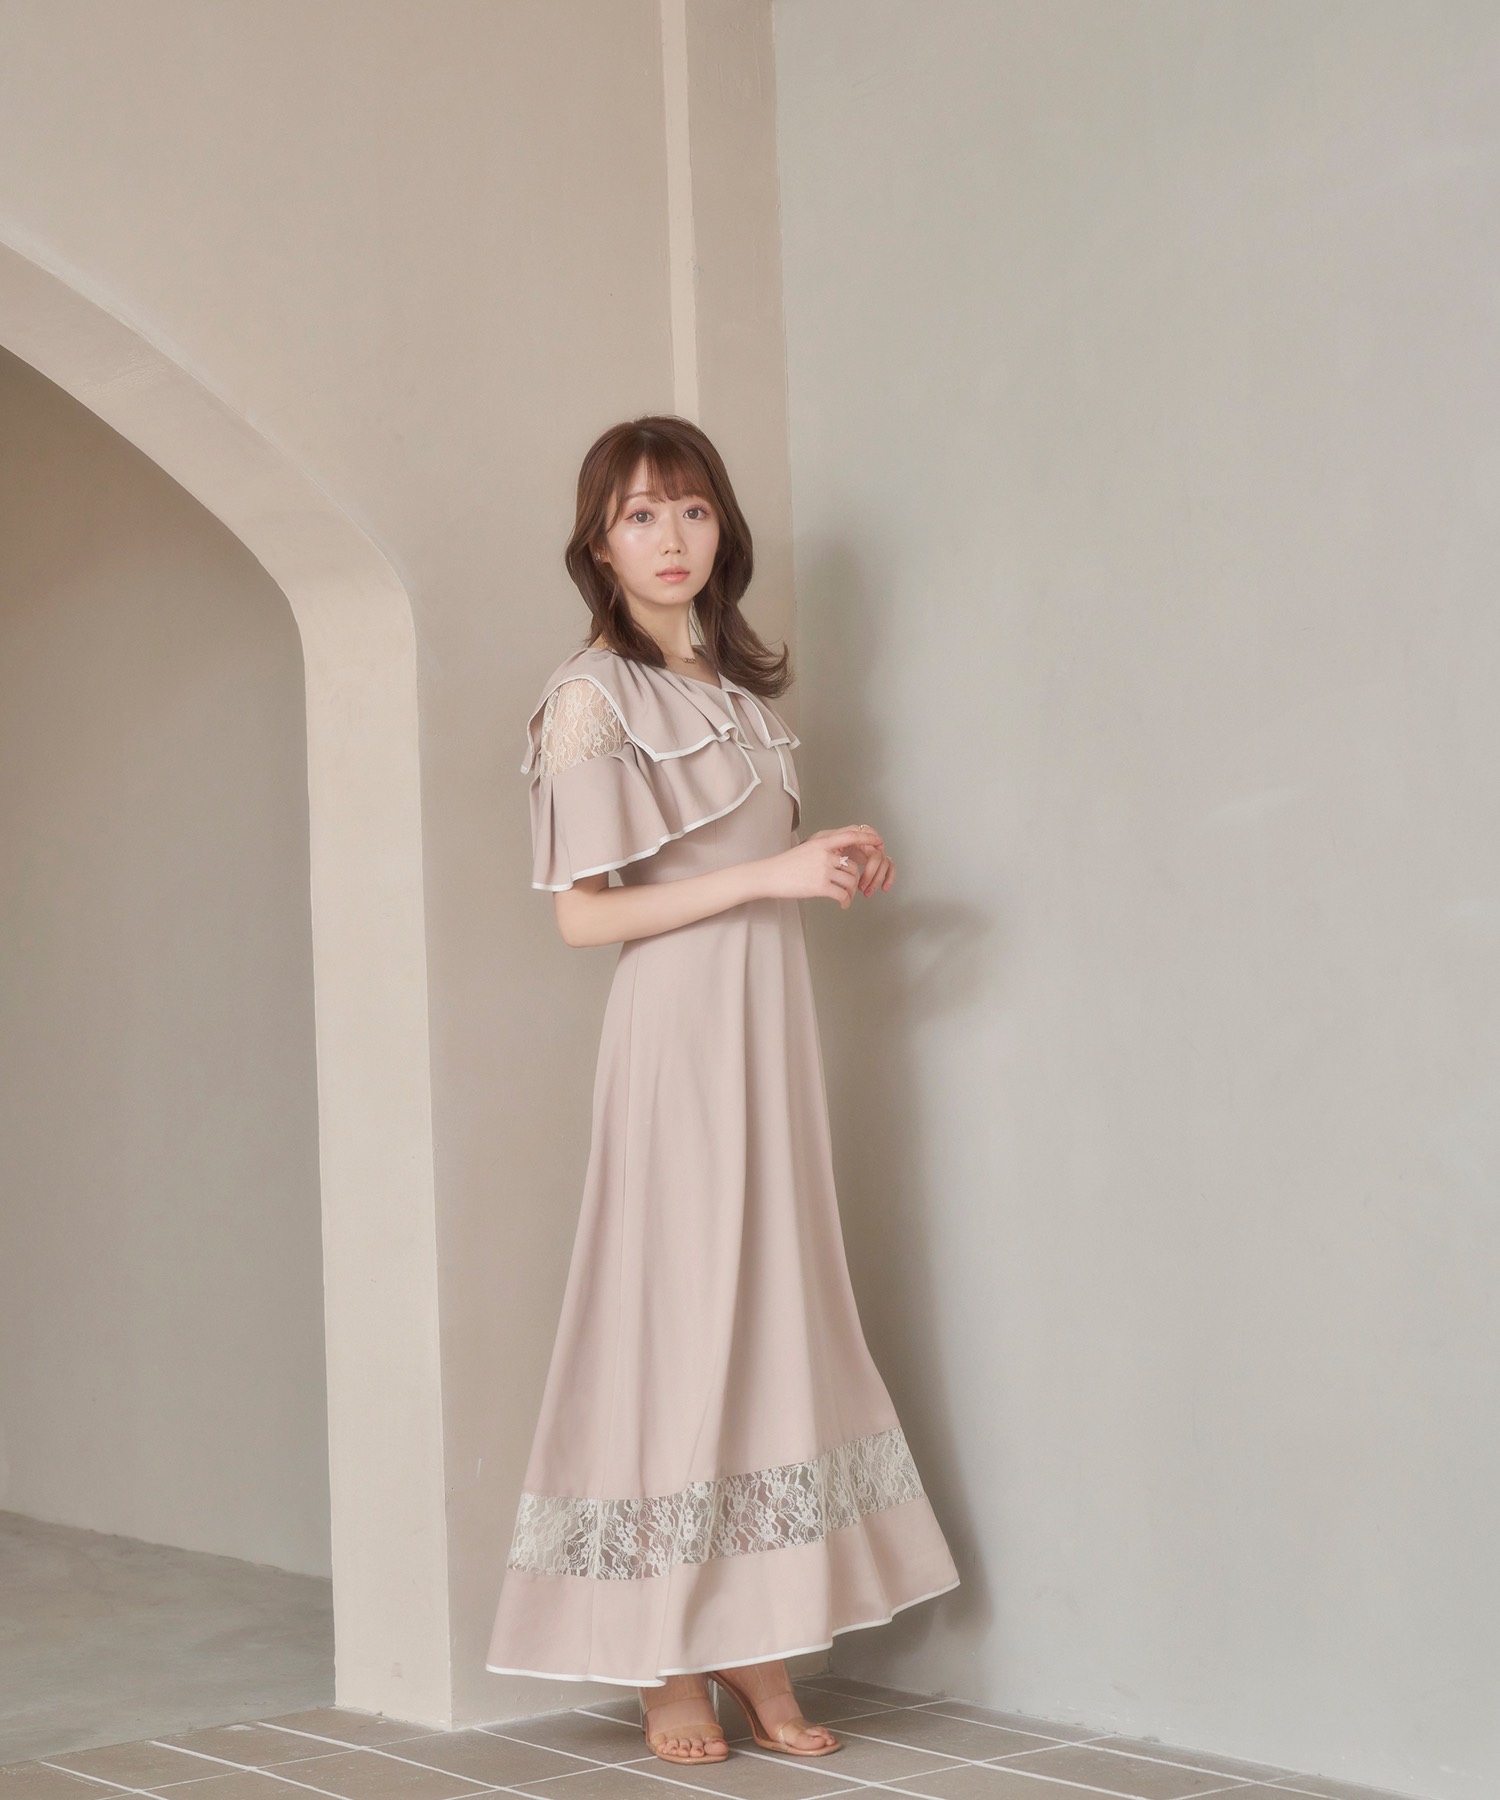 Rosé Muse piping lace switching dress www.krzysztofbialy.com